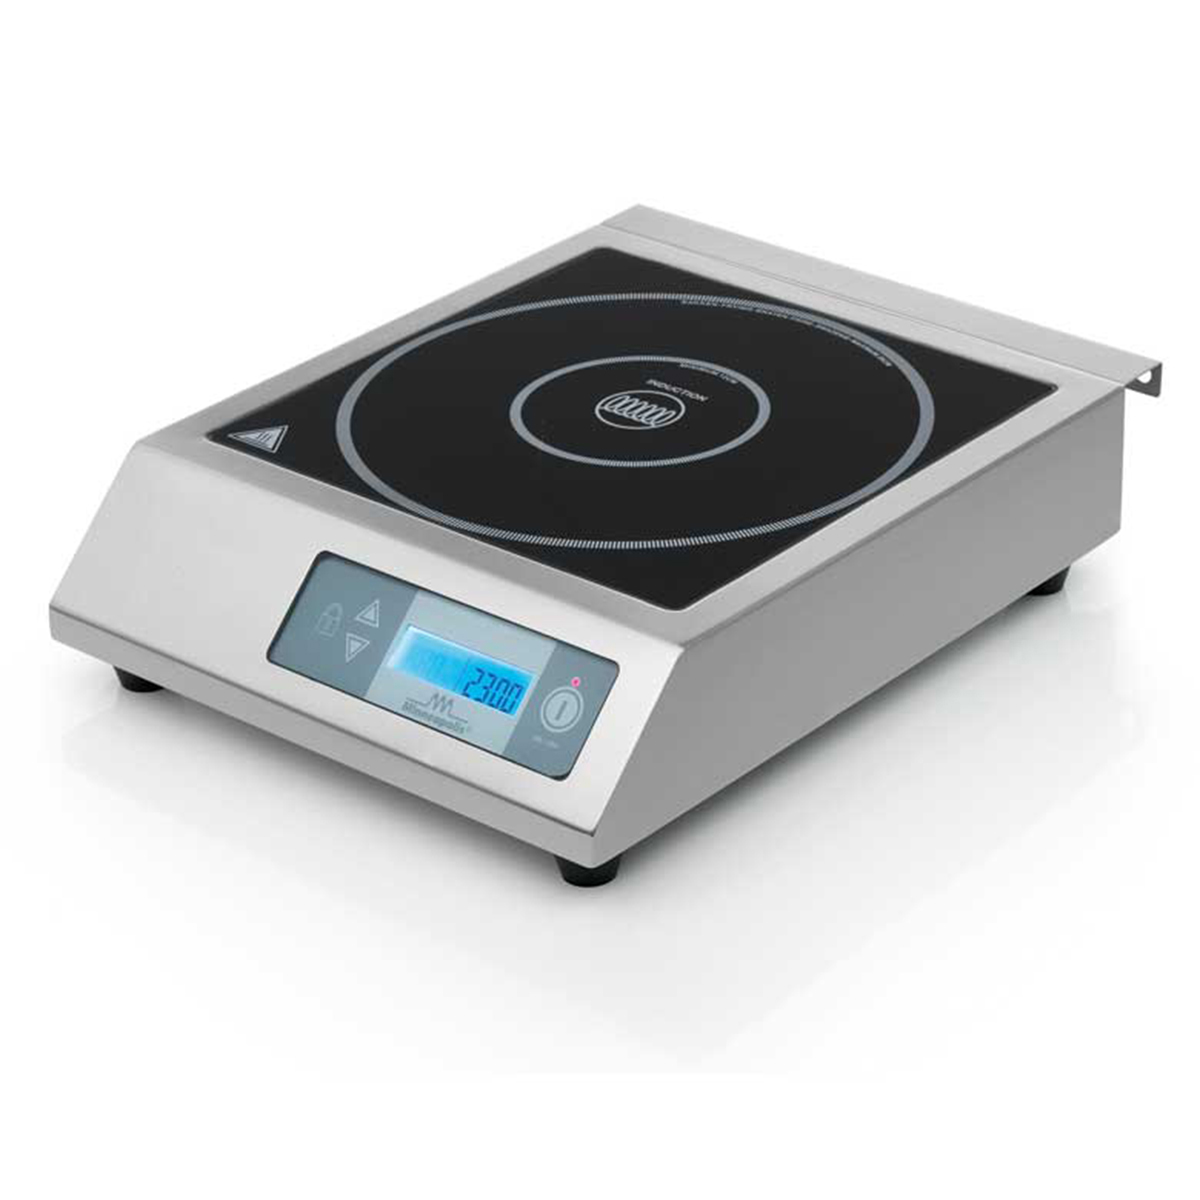 Go anywhere countertop induction hobs